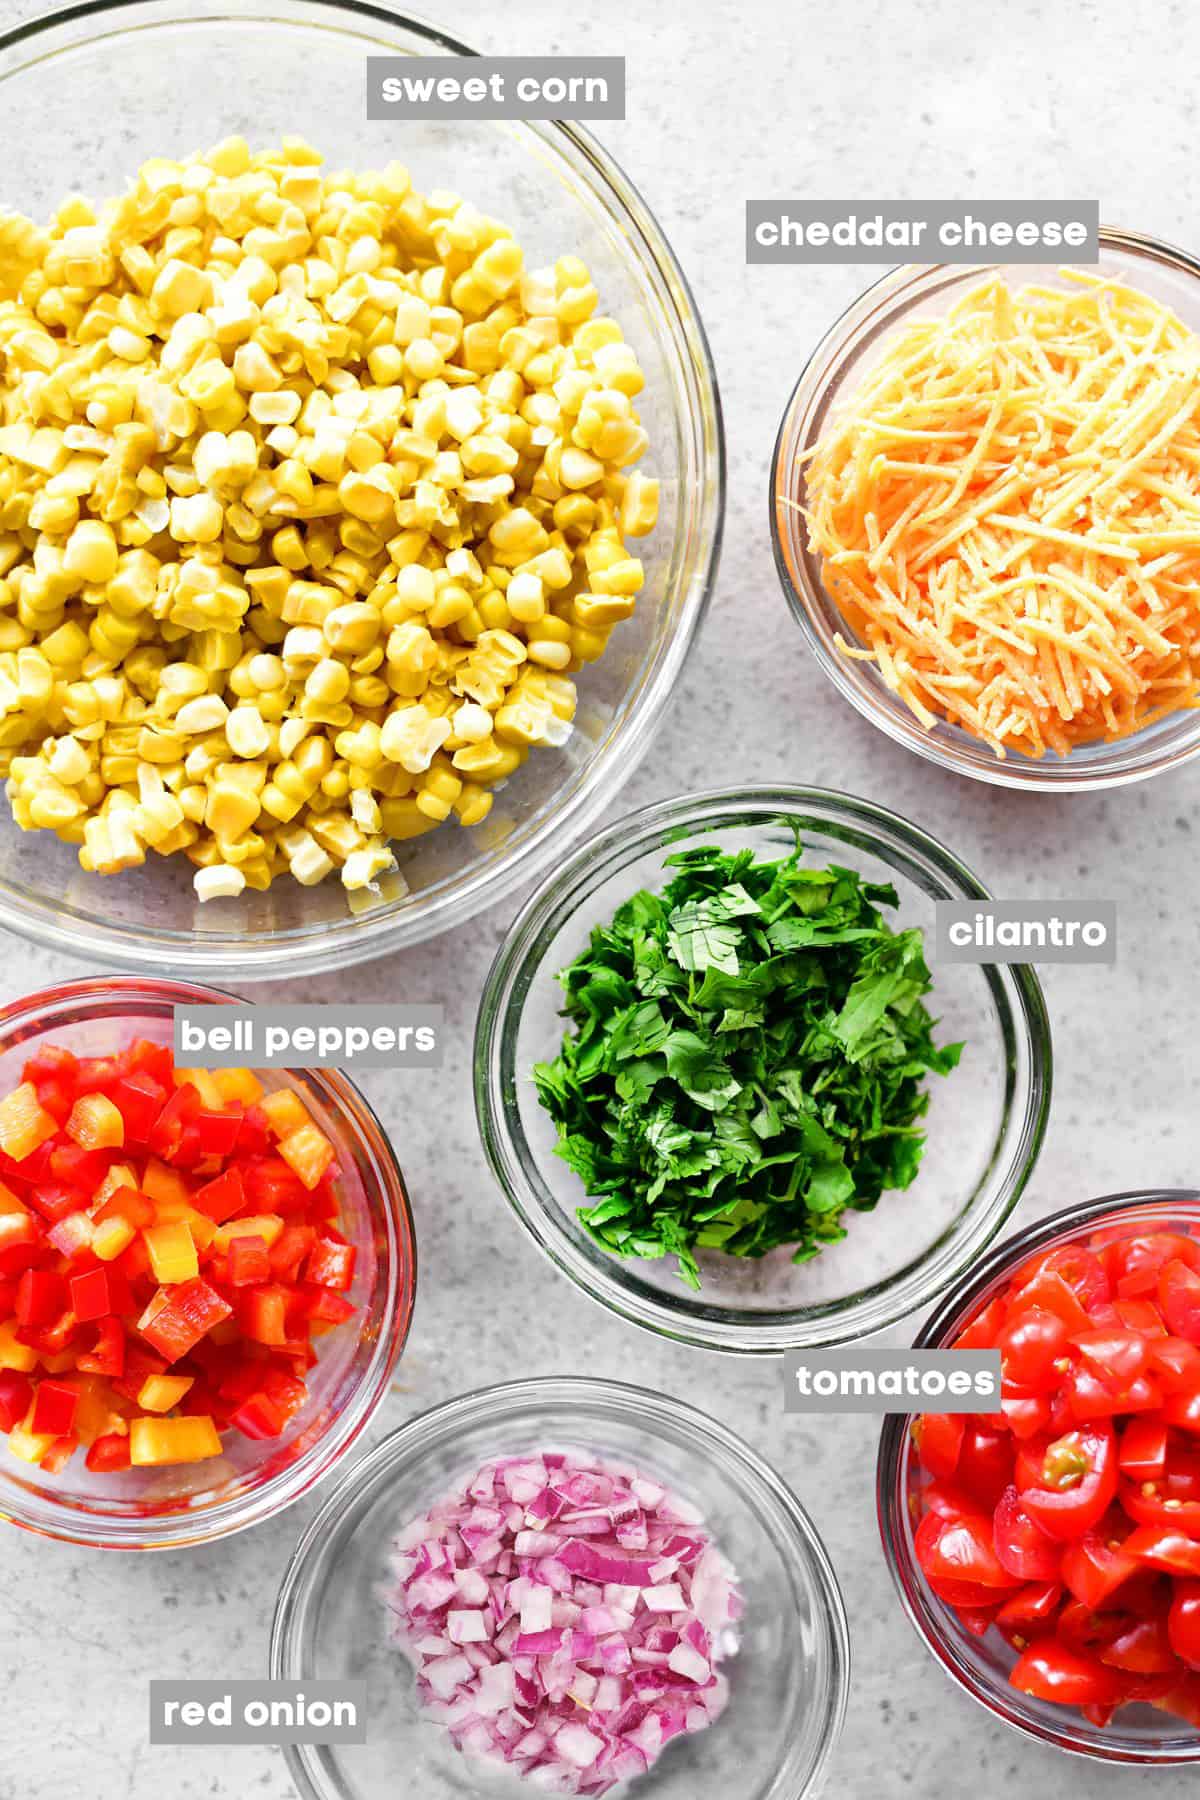 Prepped ingredients in bowls on a stainless steel countertop.